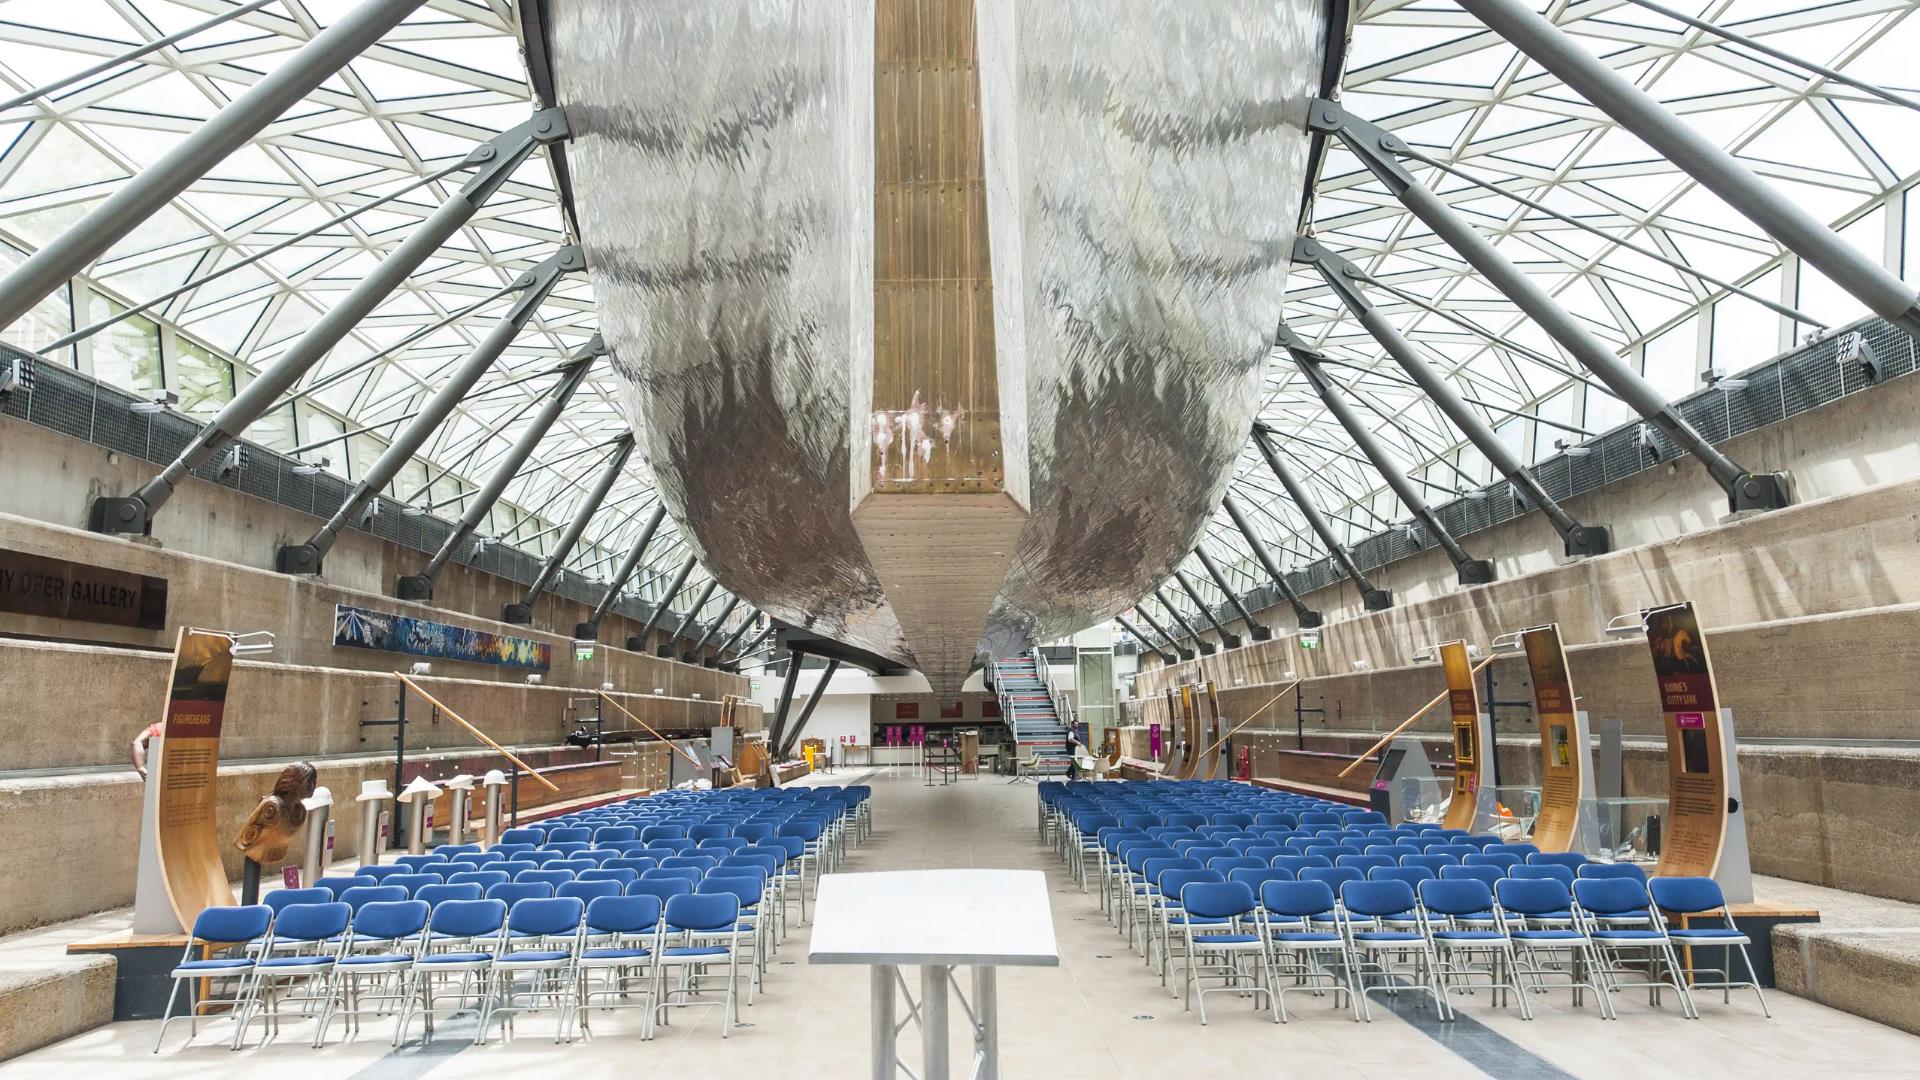 Theatre style seating is set up below the famous Cutty Sark ready for conferences, meetings and events.